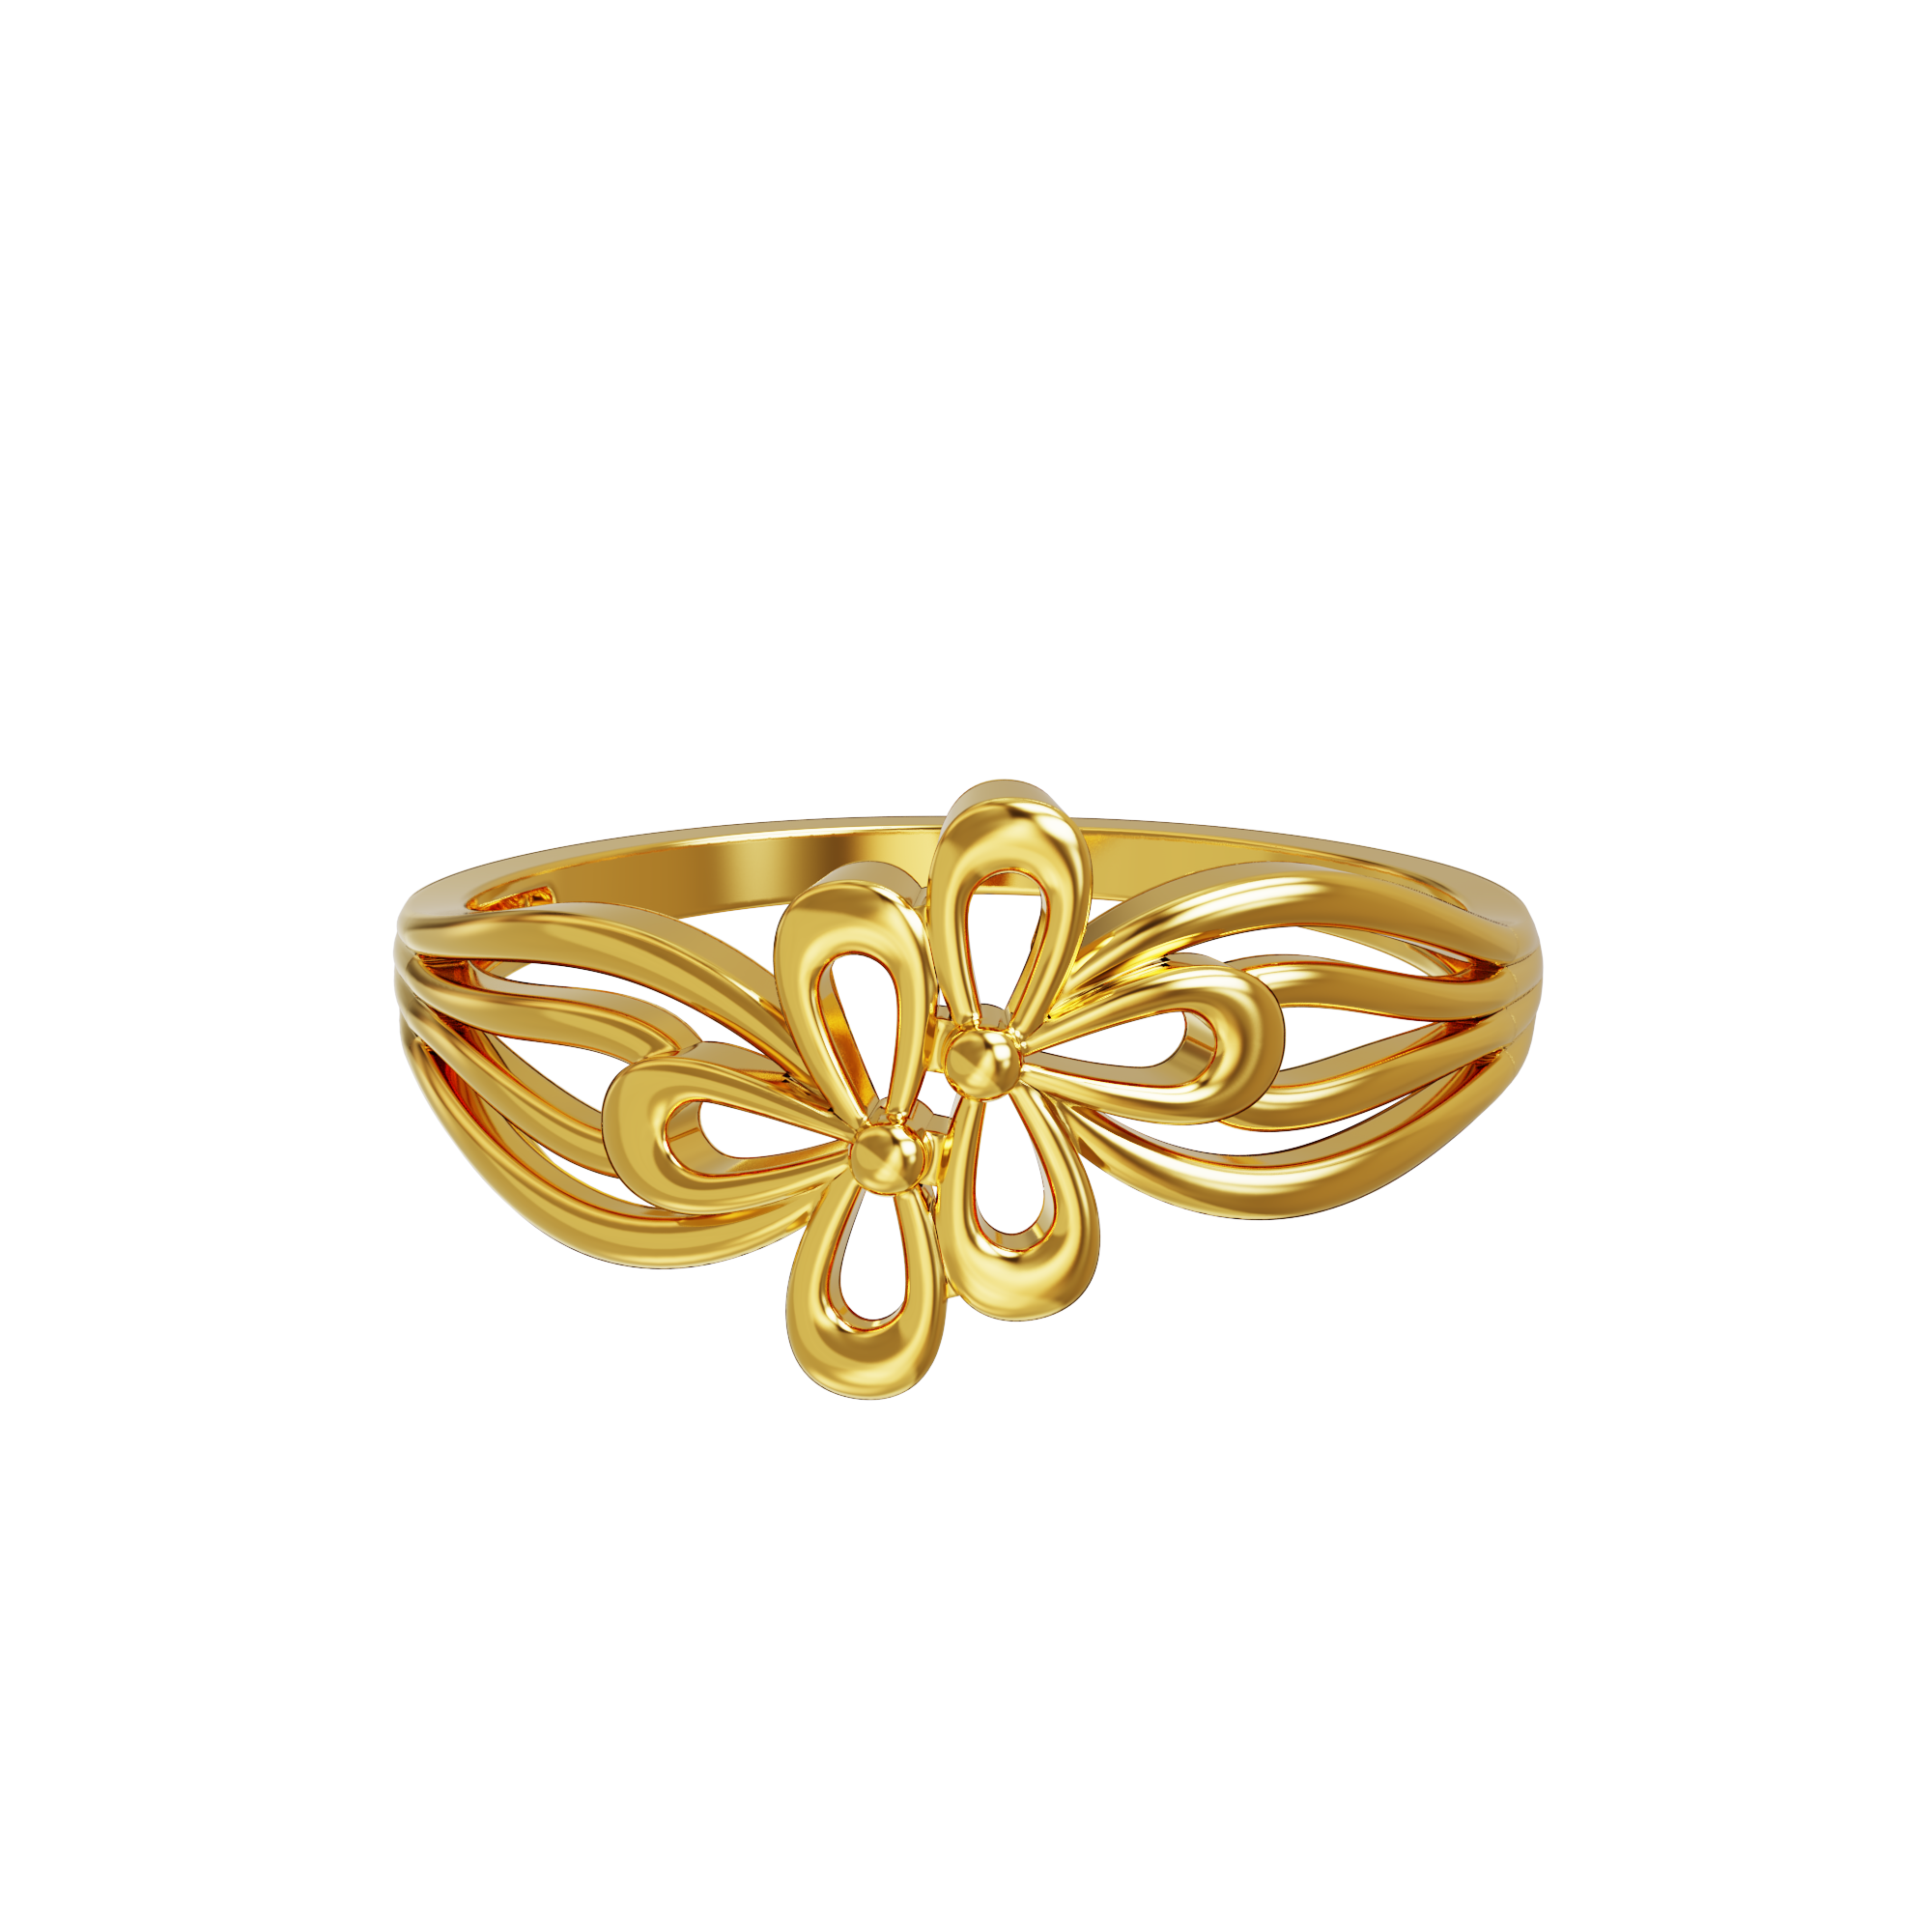 Vietnamese Gold Index Ring 3 For Women Adjustable Opening Finger With Drop  Delivery Jewelry By Dhsku From Huilaozi, $10.31 | DHgate.Com